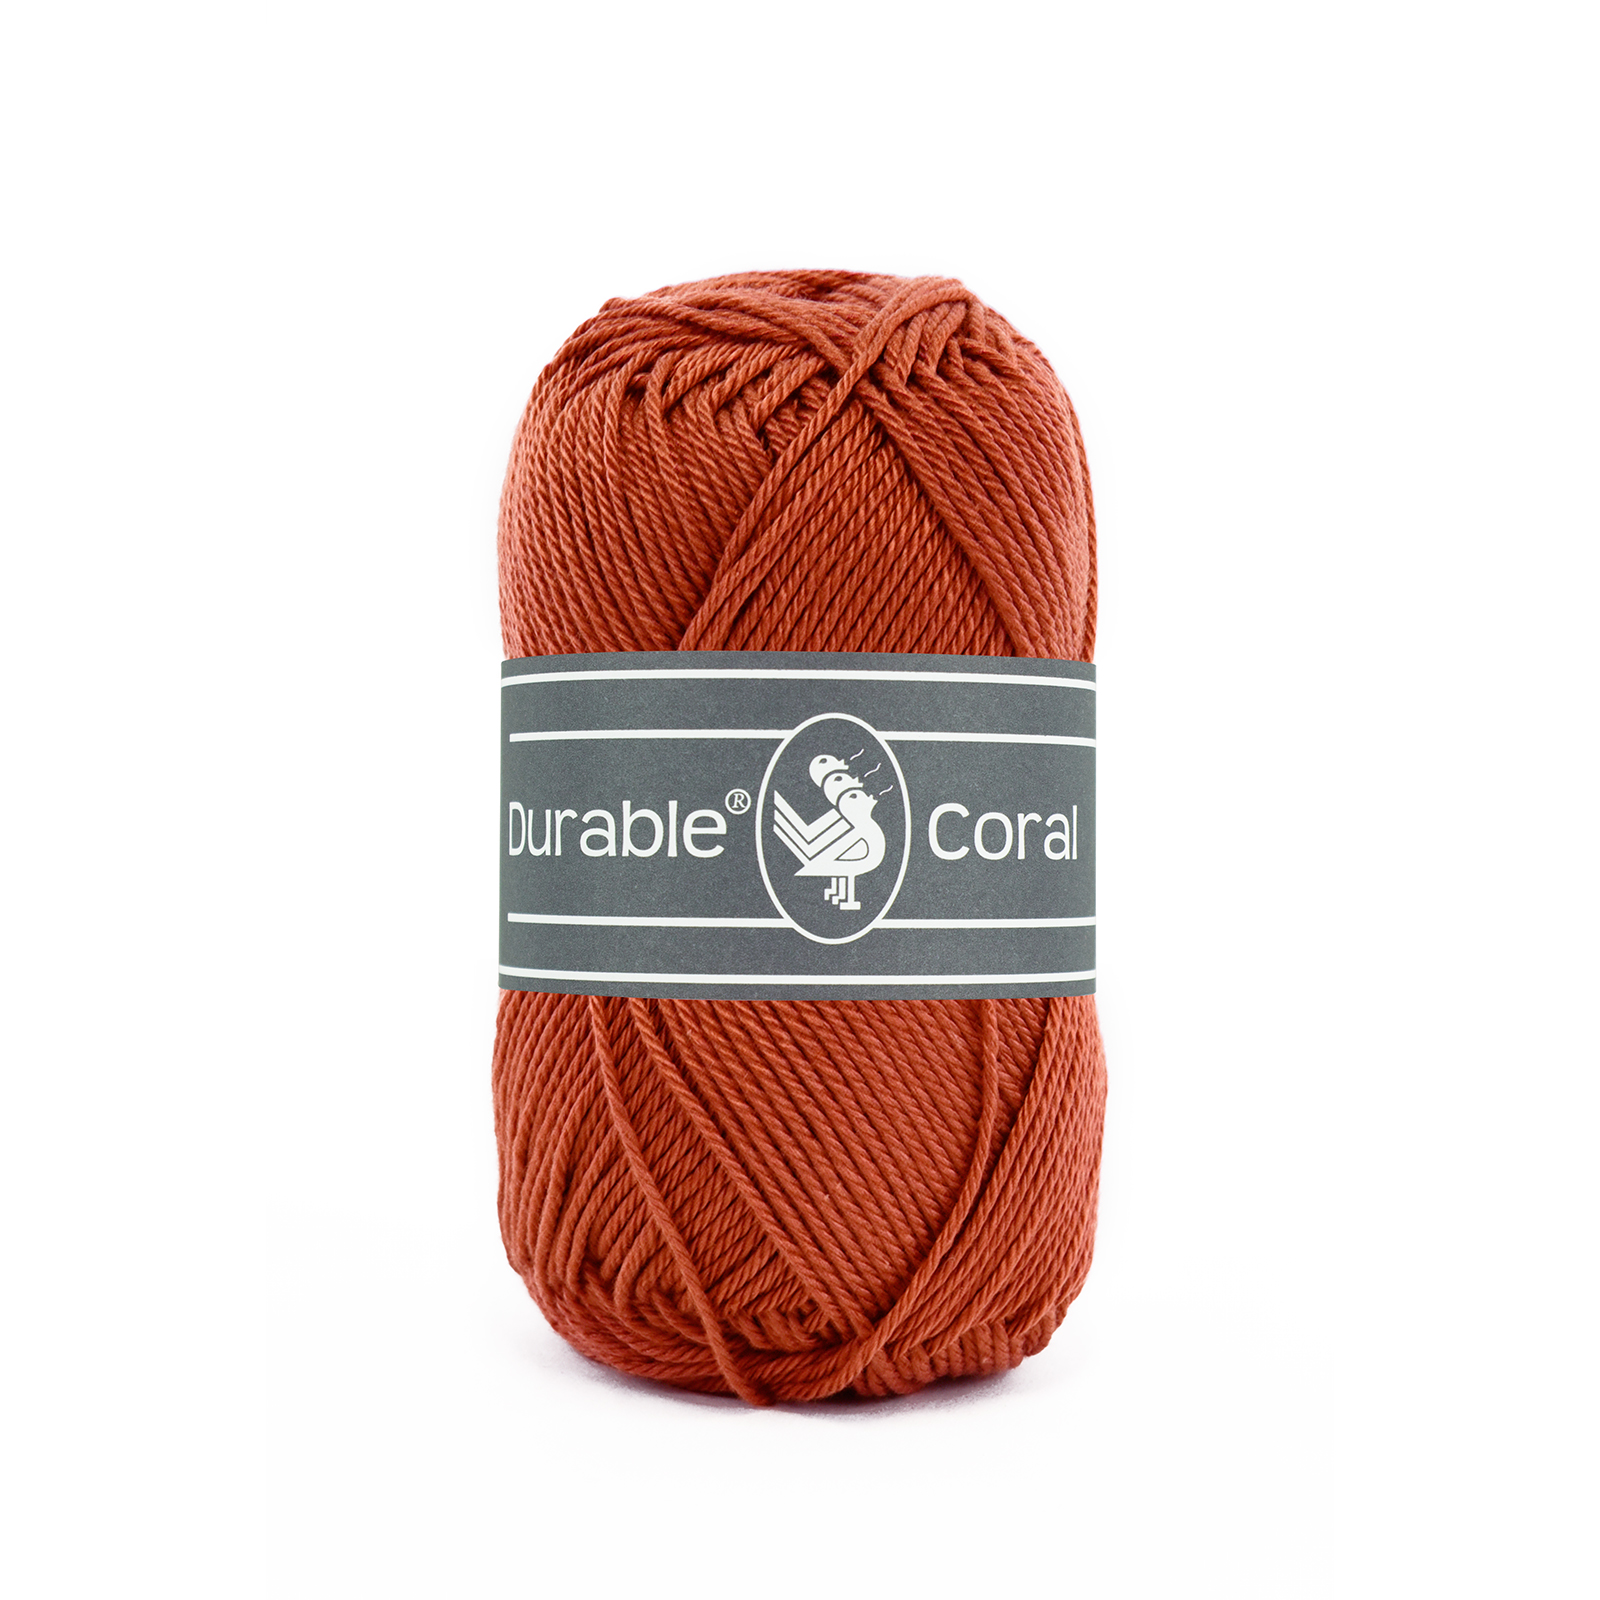 Durable Coral Steenrood-2239